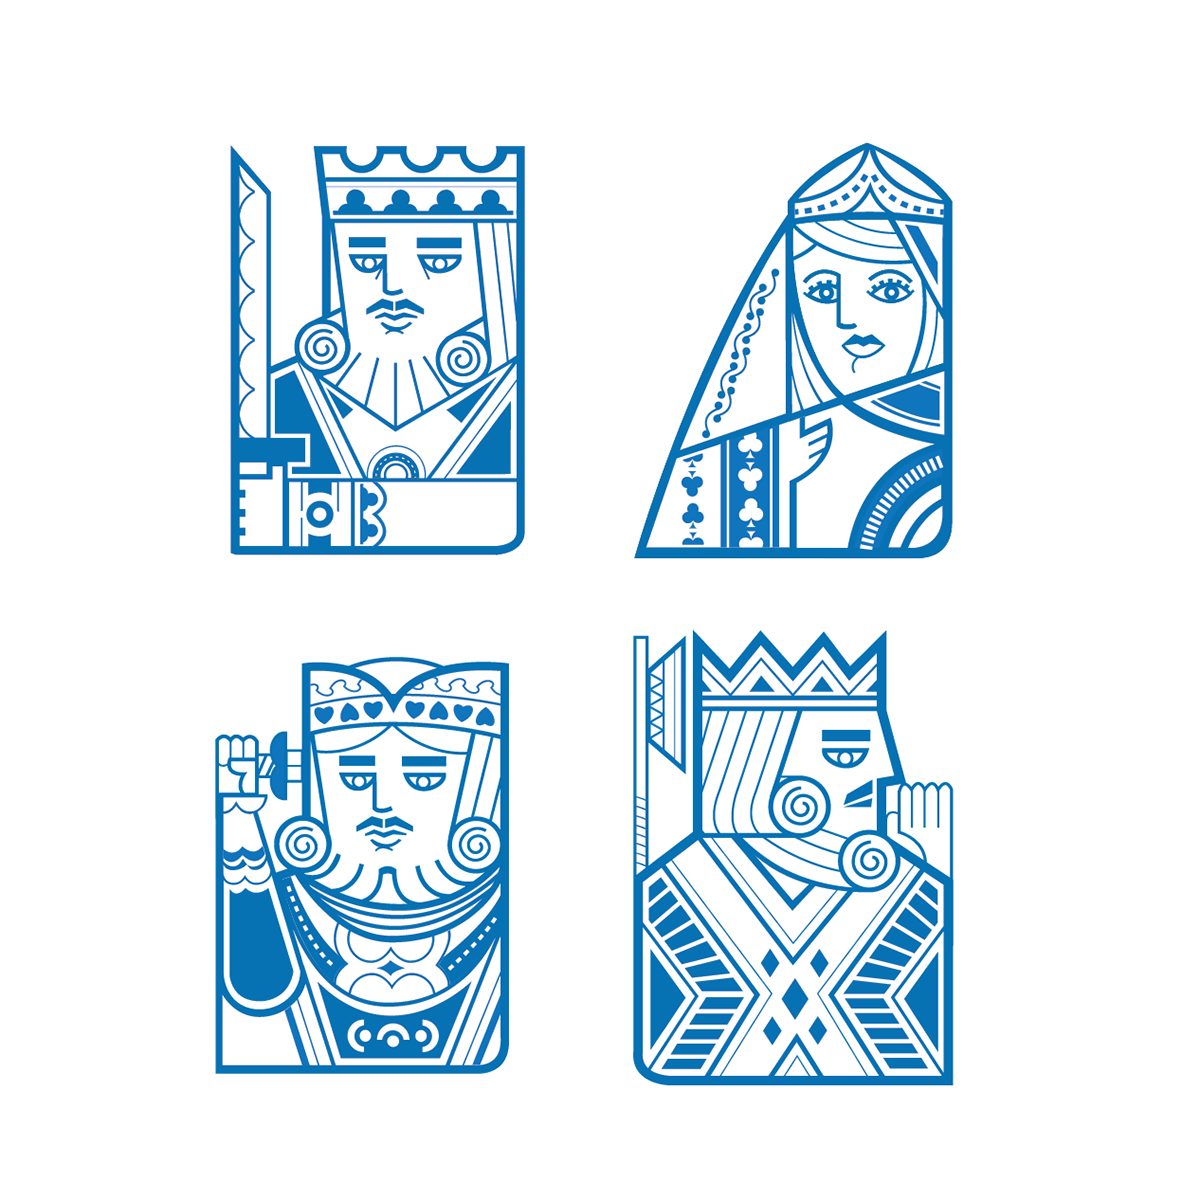 Playing cards characters on Behance